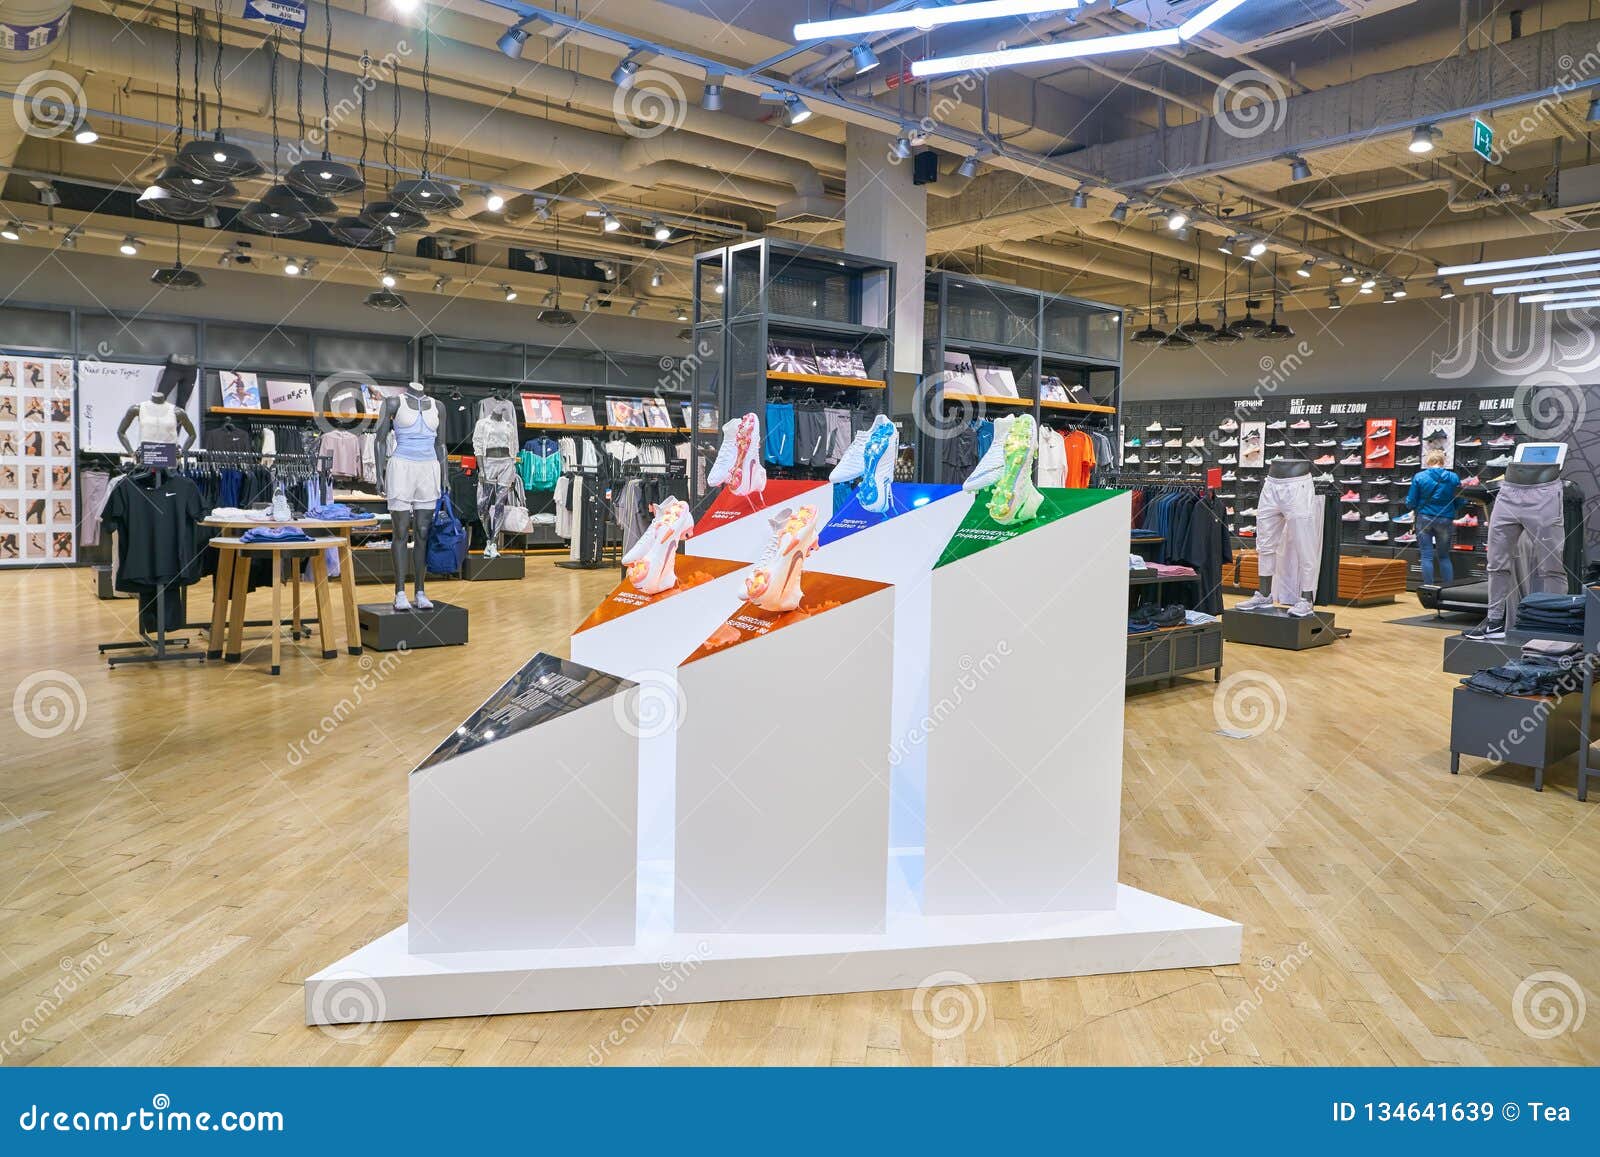 Nike store editorial stock image. Image of athletic - 134641639